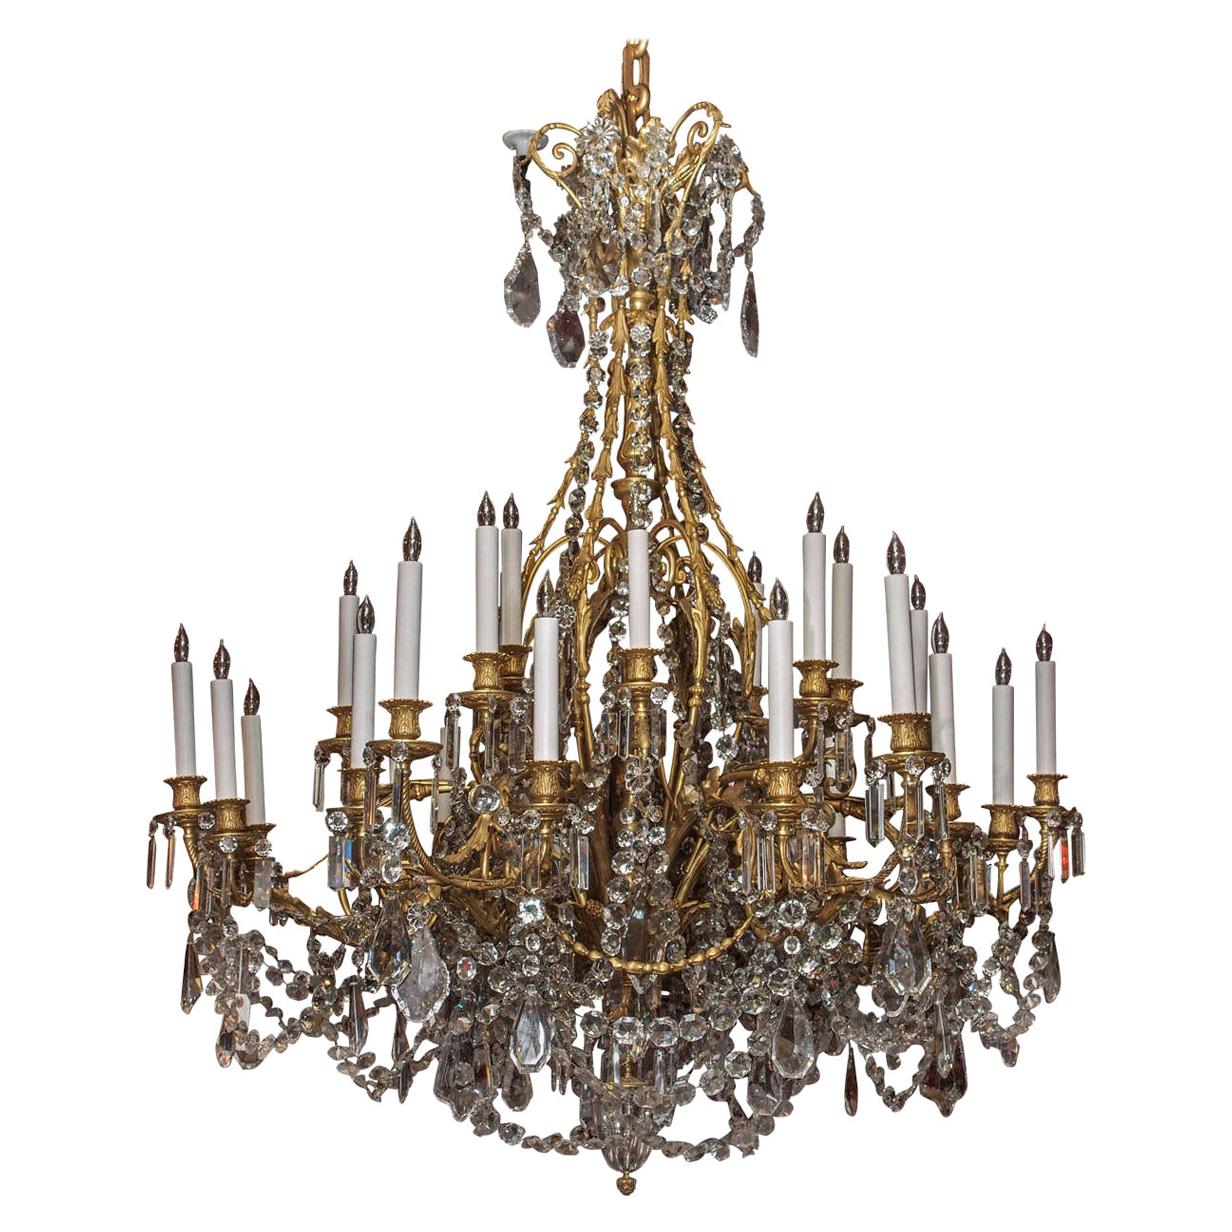 Antique French Napoleon III Baccarat Crystal and Ormolu Chandelier For Sale